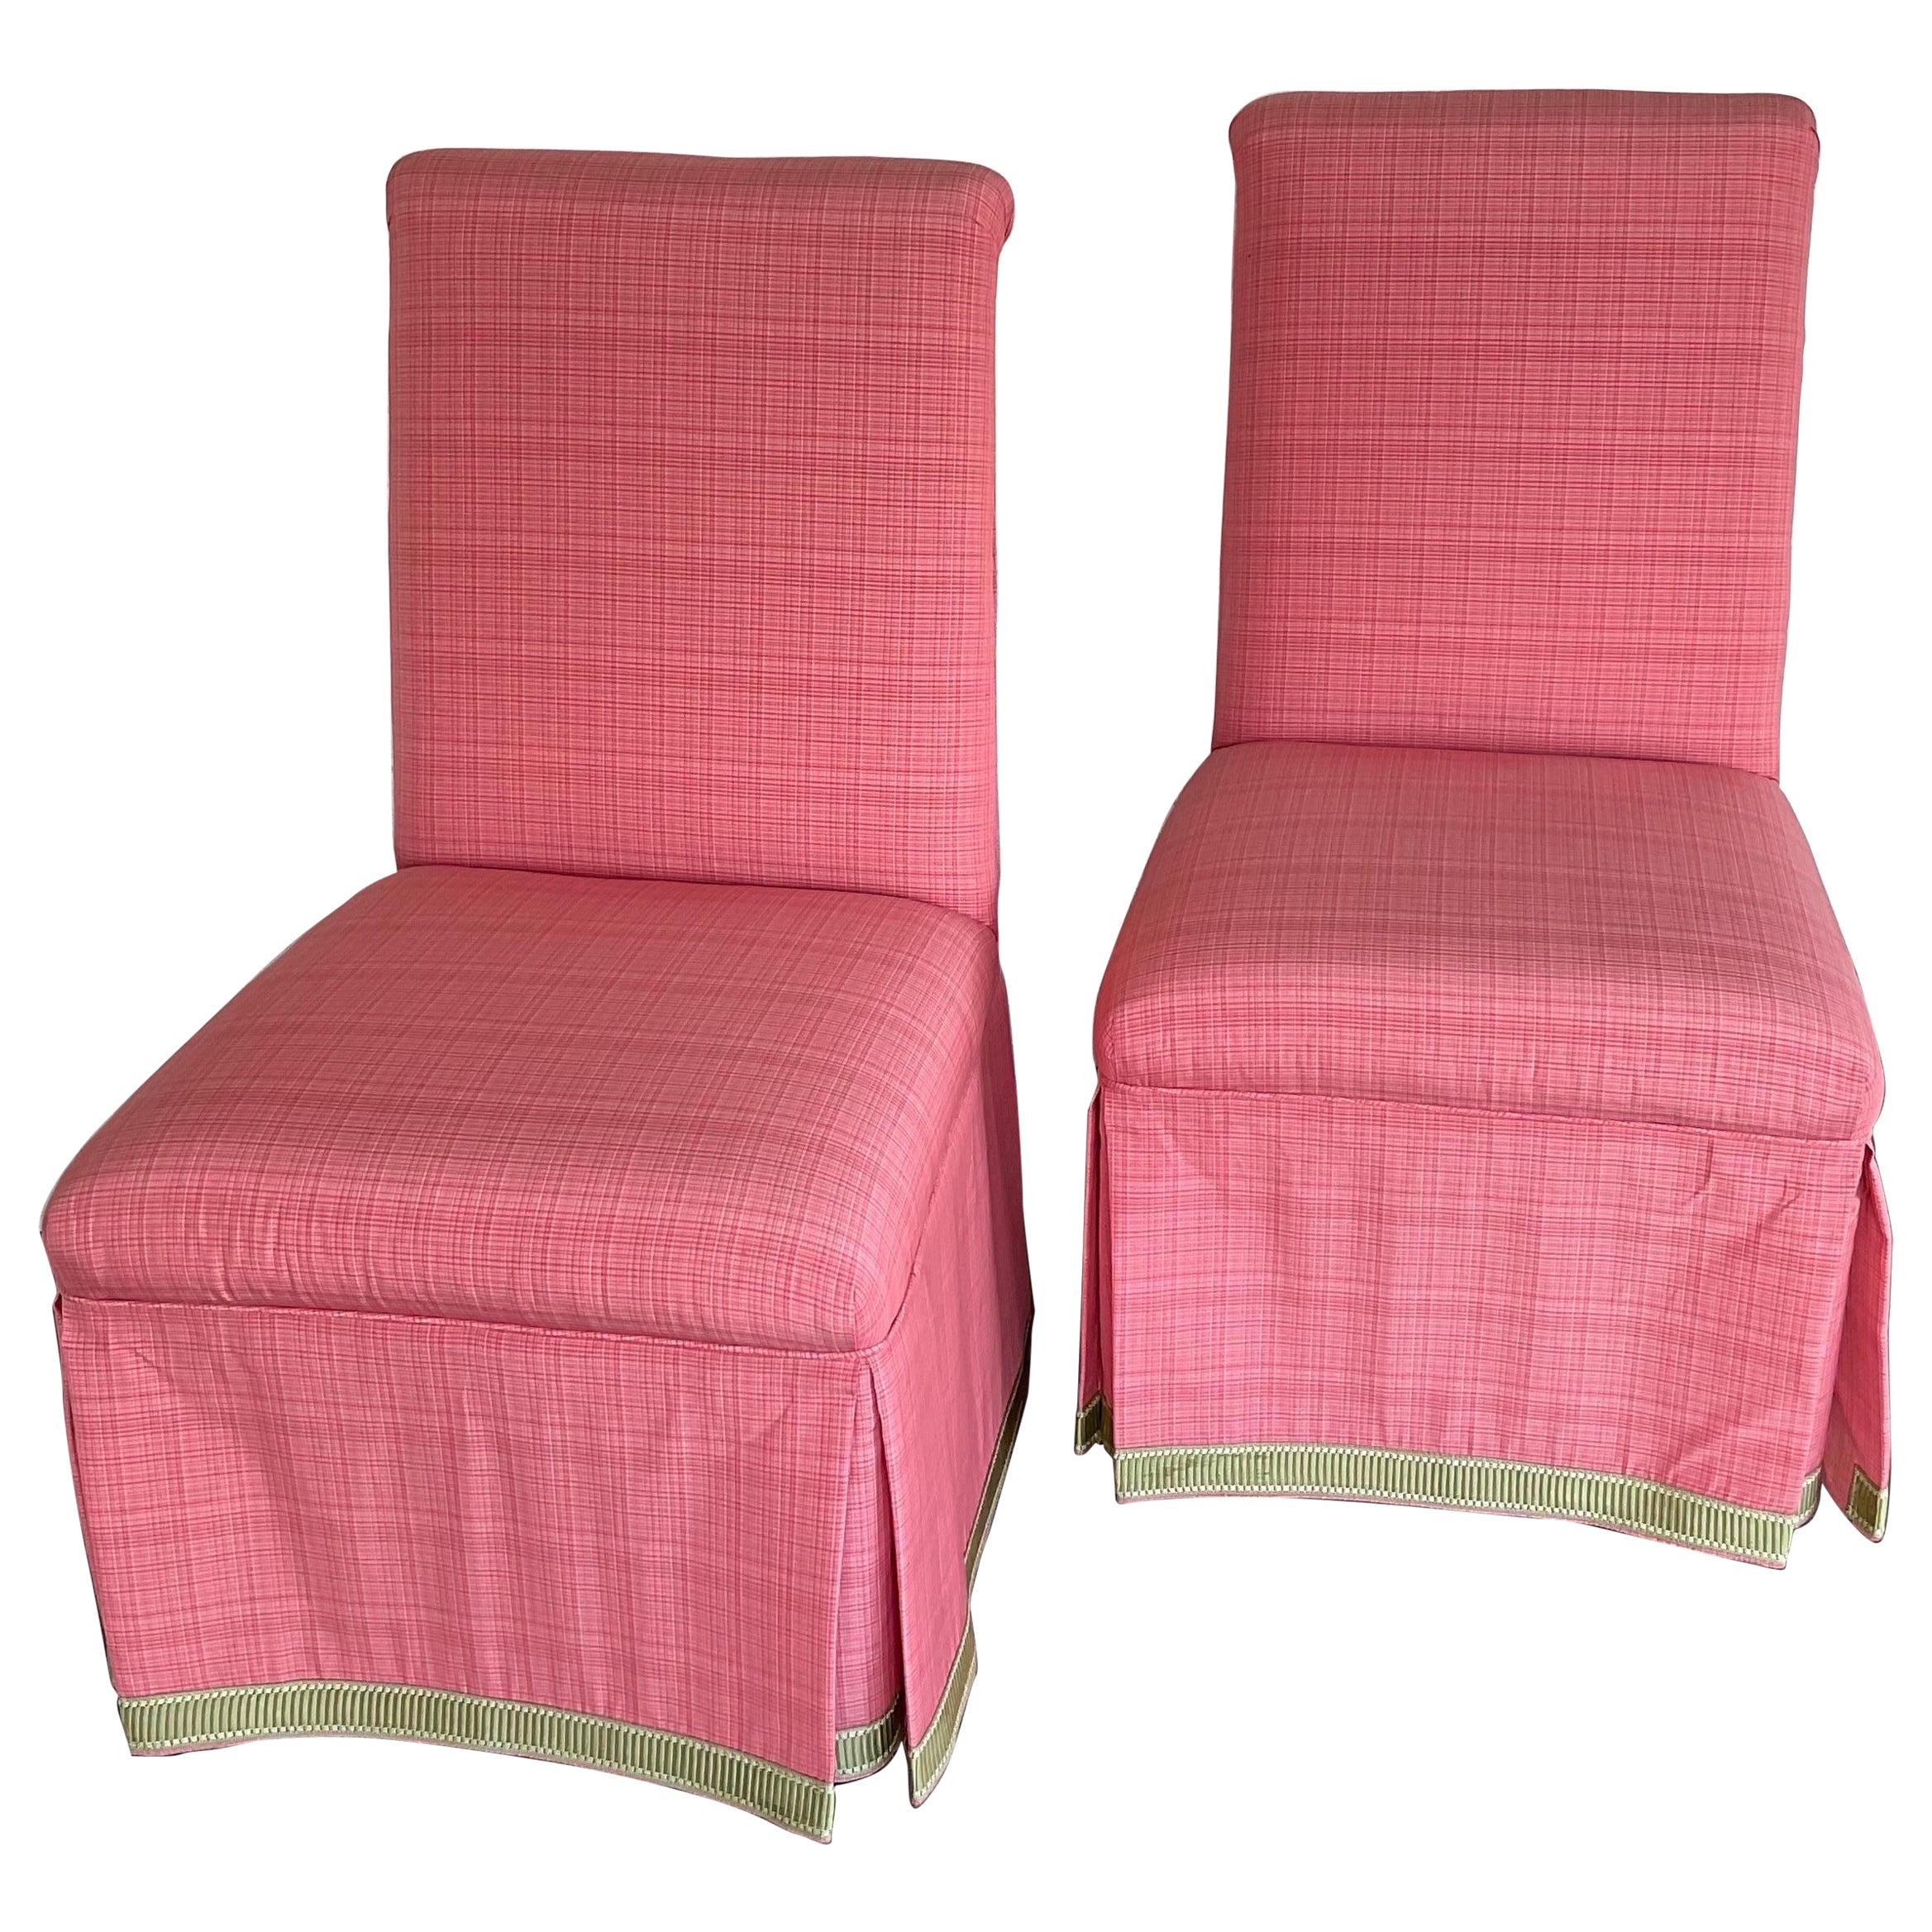 Lee Jofa Custom Parsons Chairs, a Pair For Sale